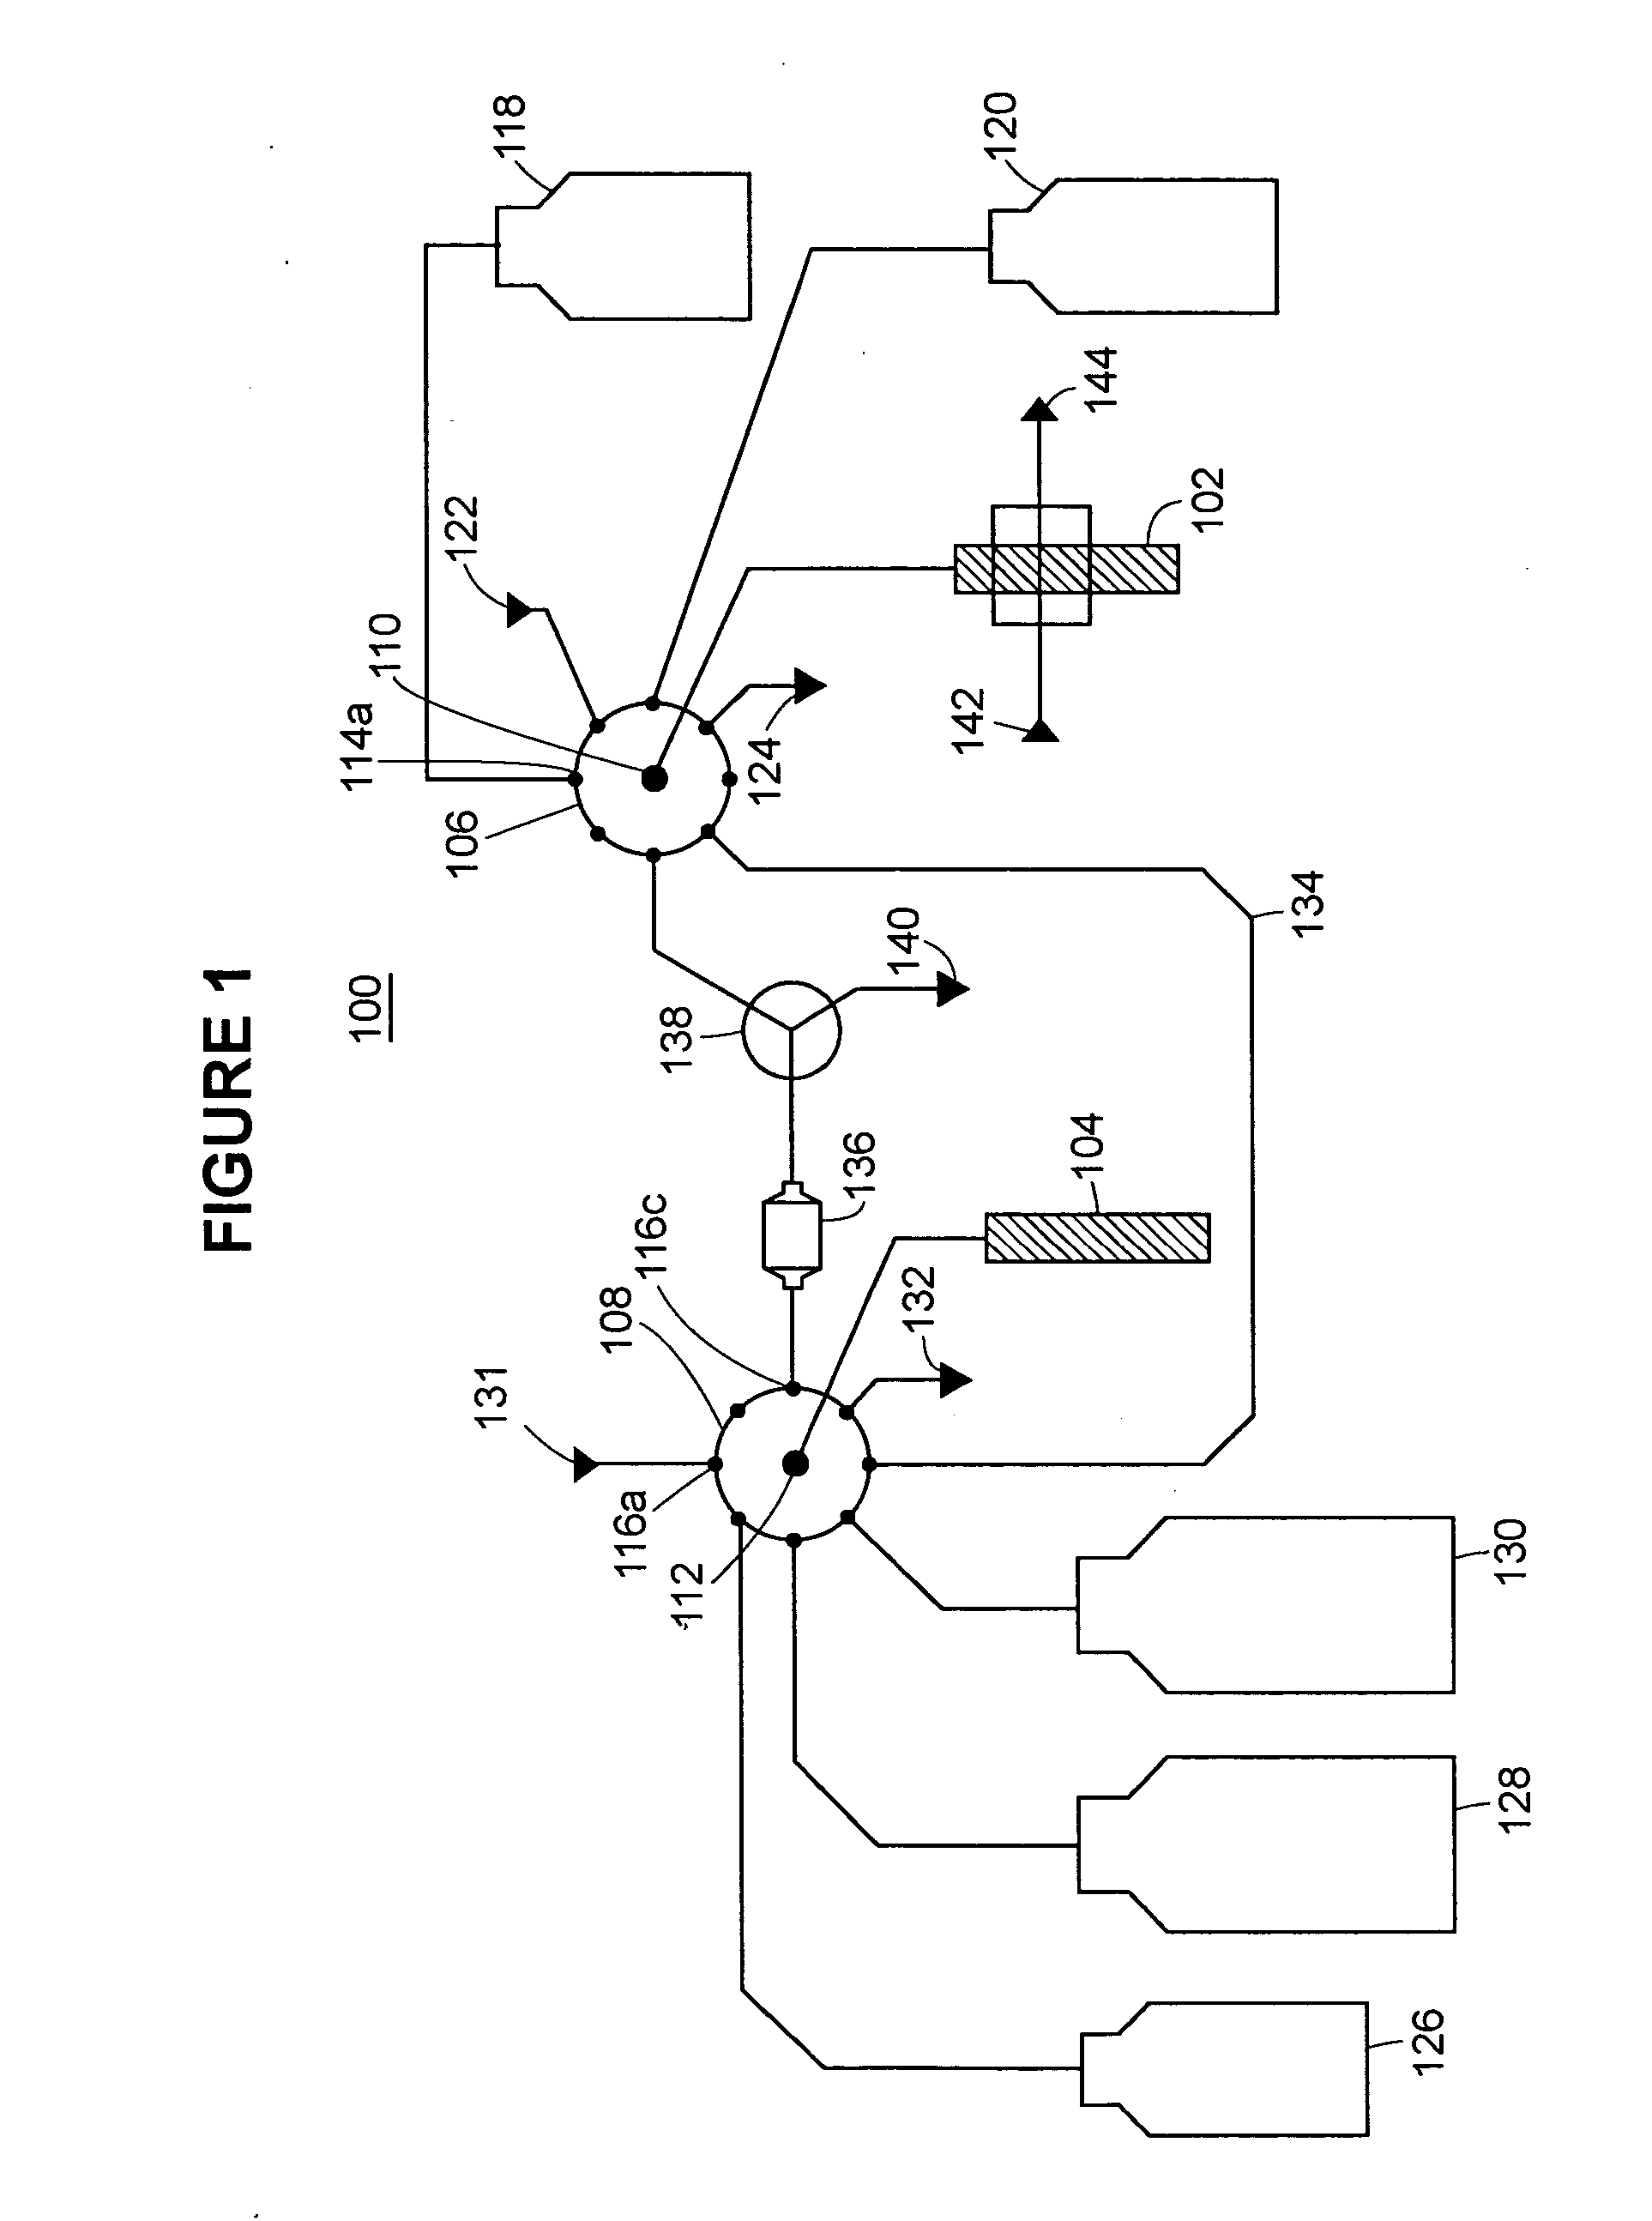 Device and method for measuring glycosaminoglycans in body fluids